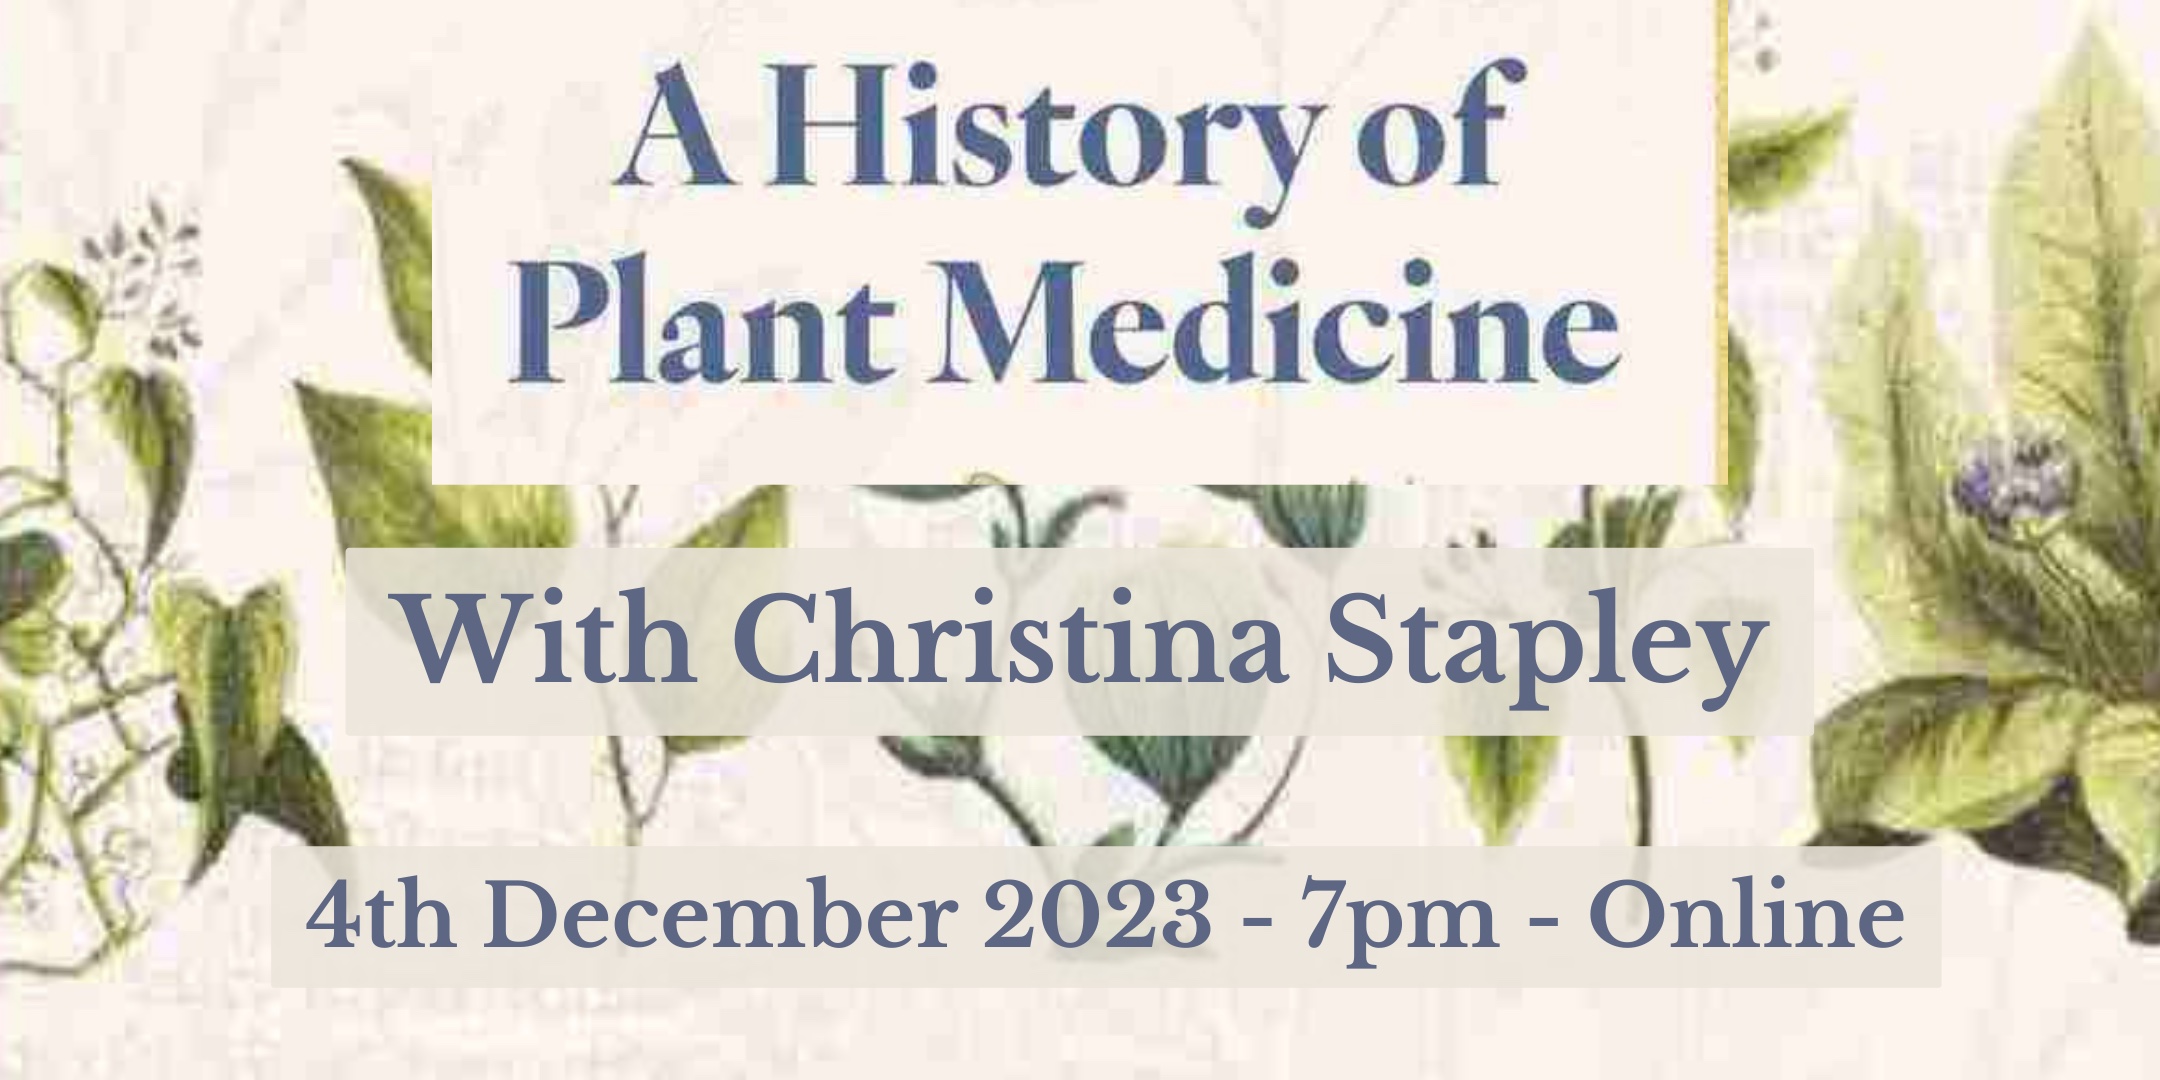 AMH online event FREE - A History of Plant Medicine with Christina Stapley